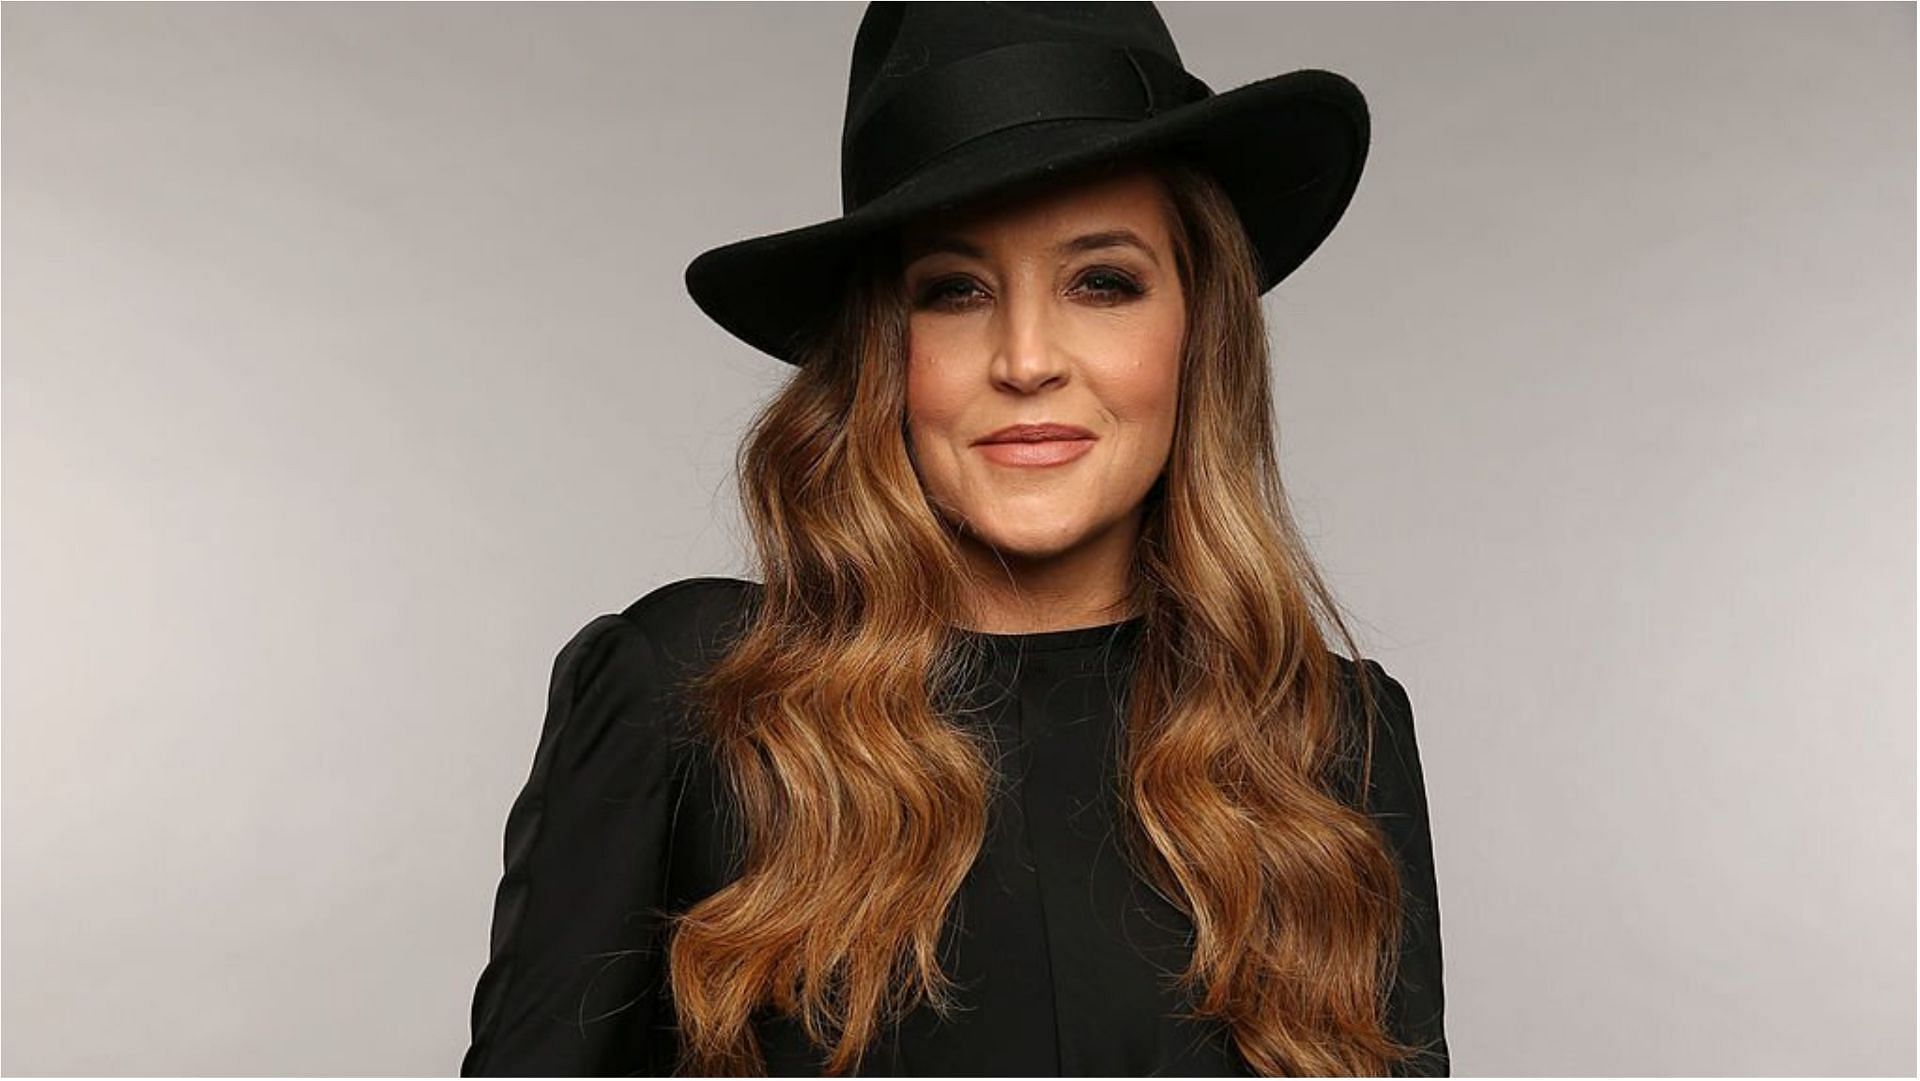 Lisa Marie Presley died of cardiac arrest at the age of 54 (Image via Christopher Polk/Getty Images)